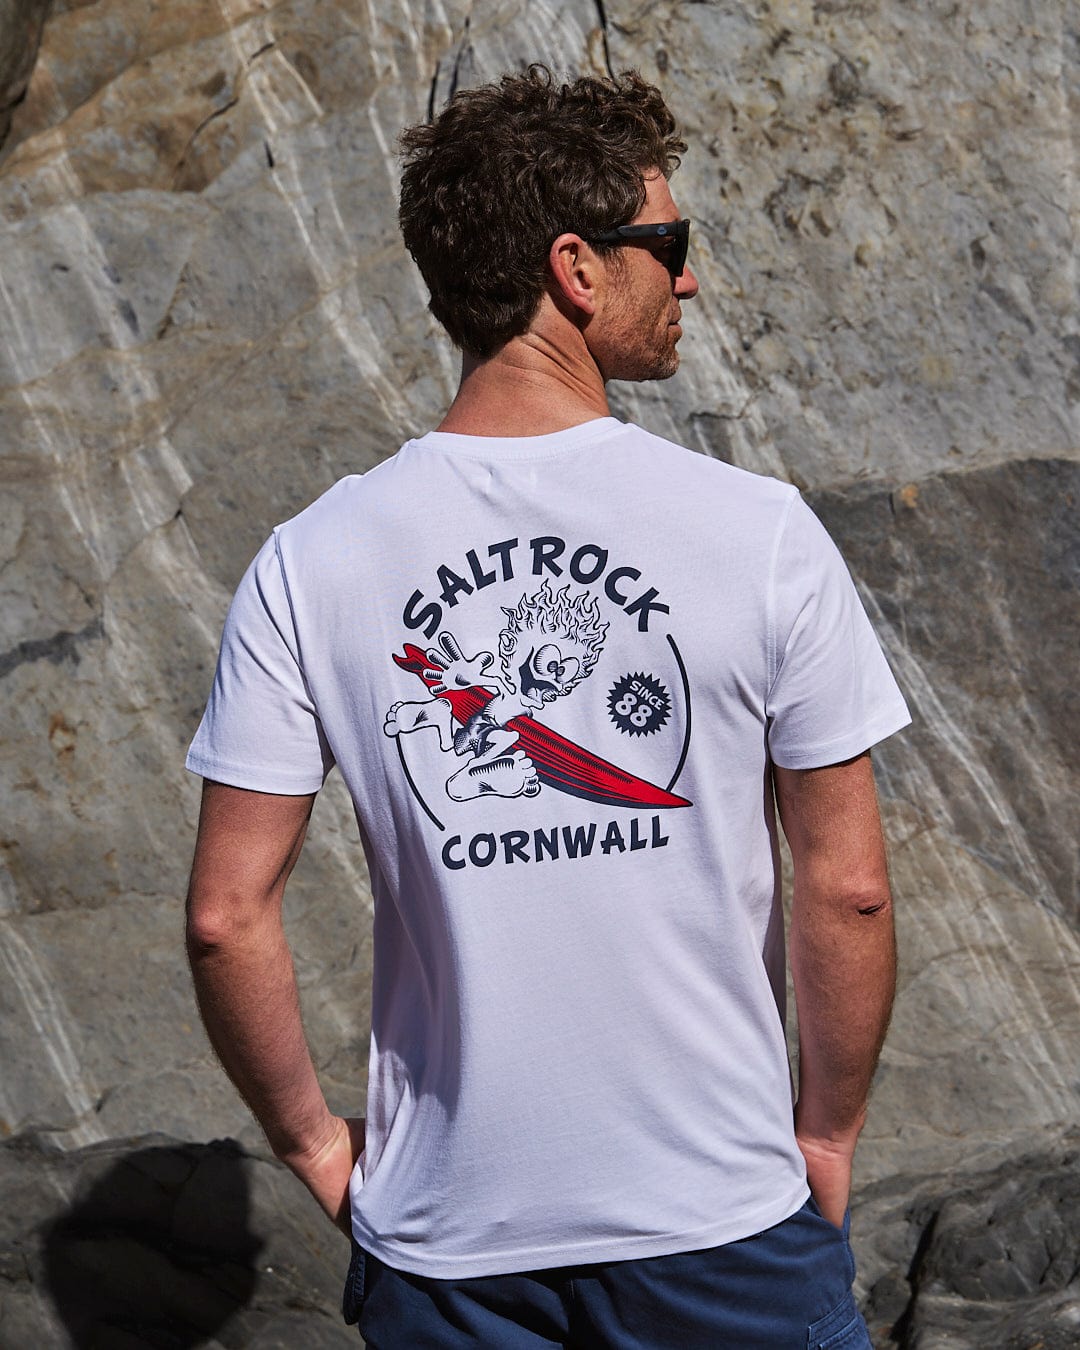 Man in sunglasses standing against a rocky backdrop wearing a white t-shirt with "Wave Rider Cornwall" graphic design, crafted from peached soft material by Saltrock.